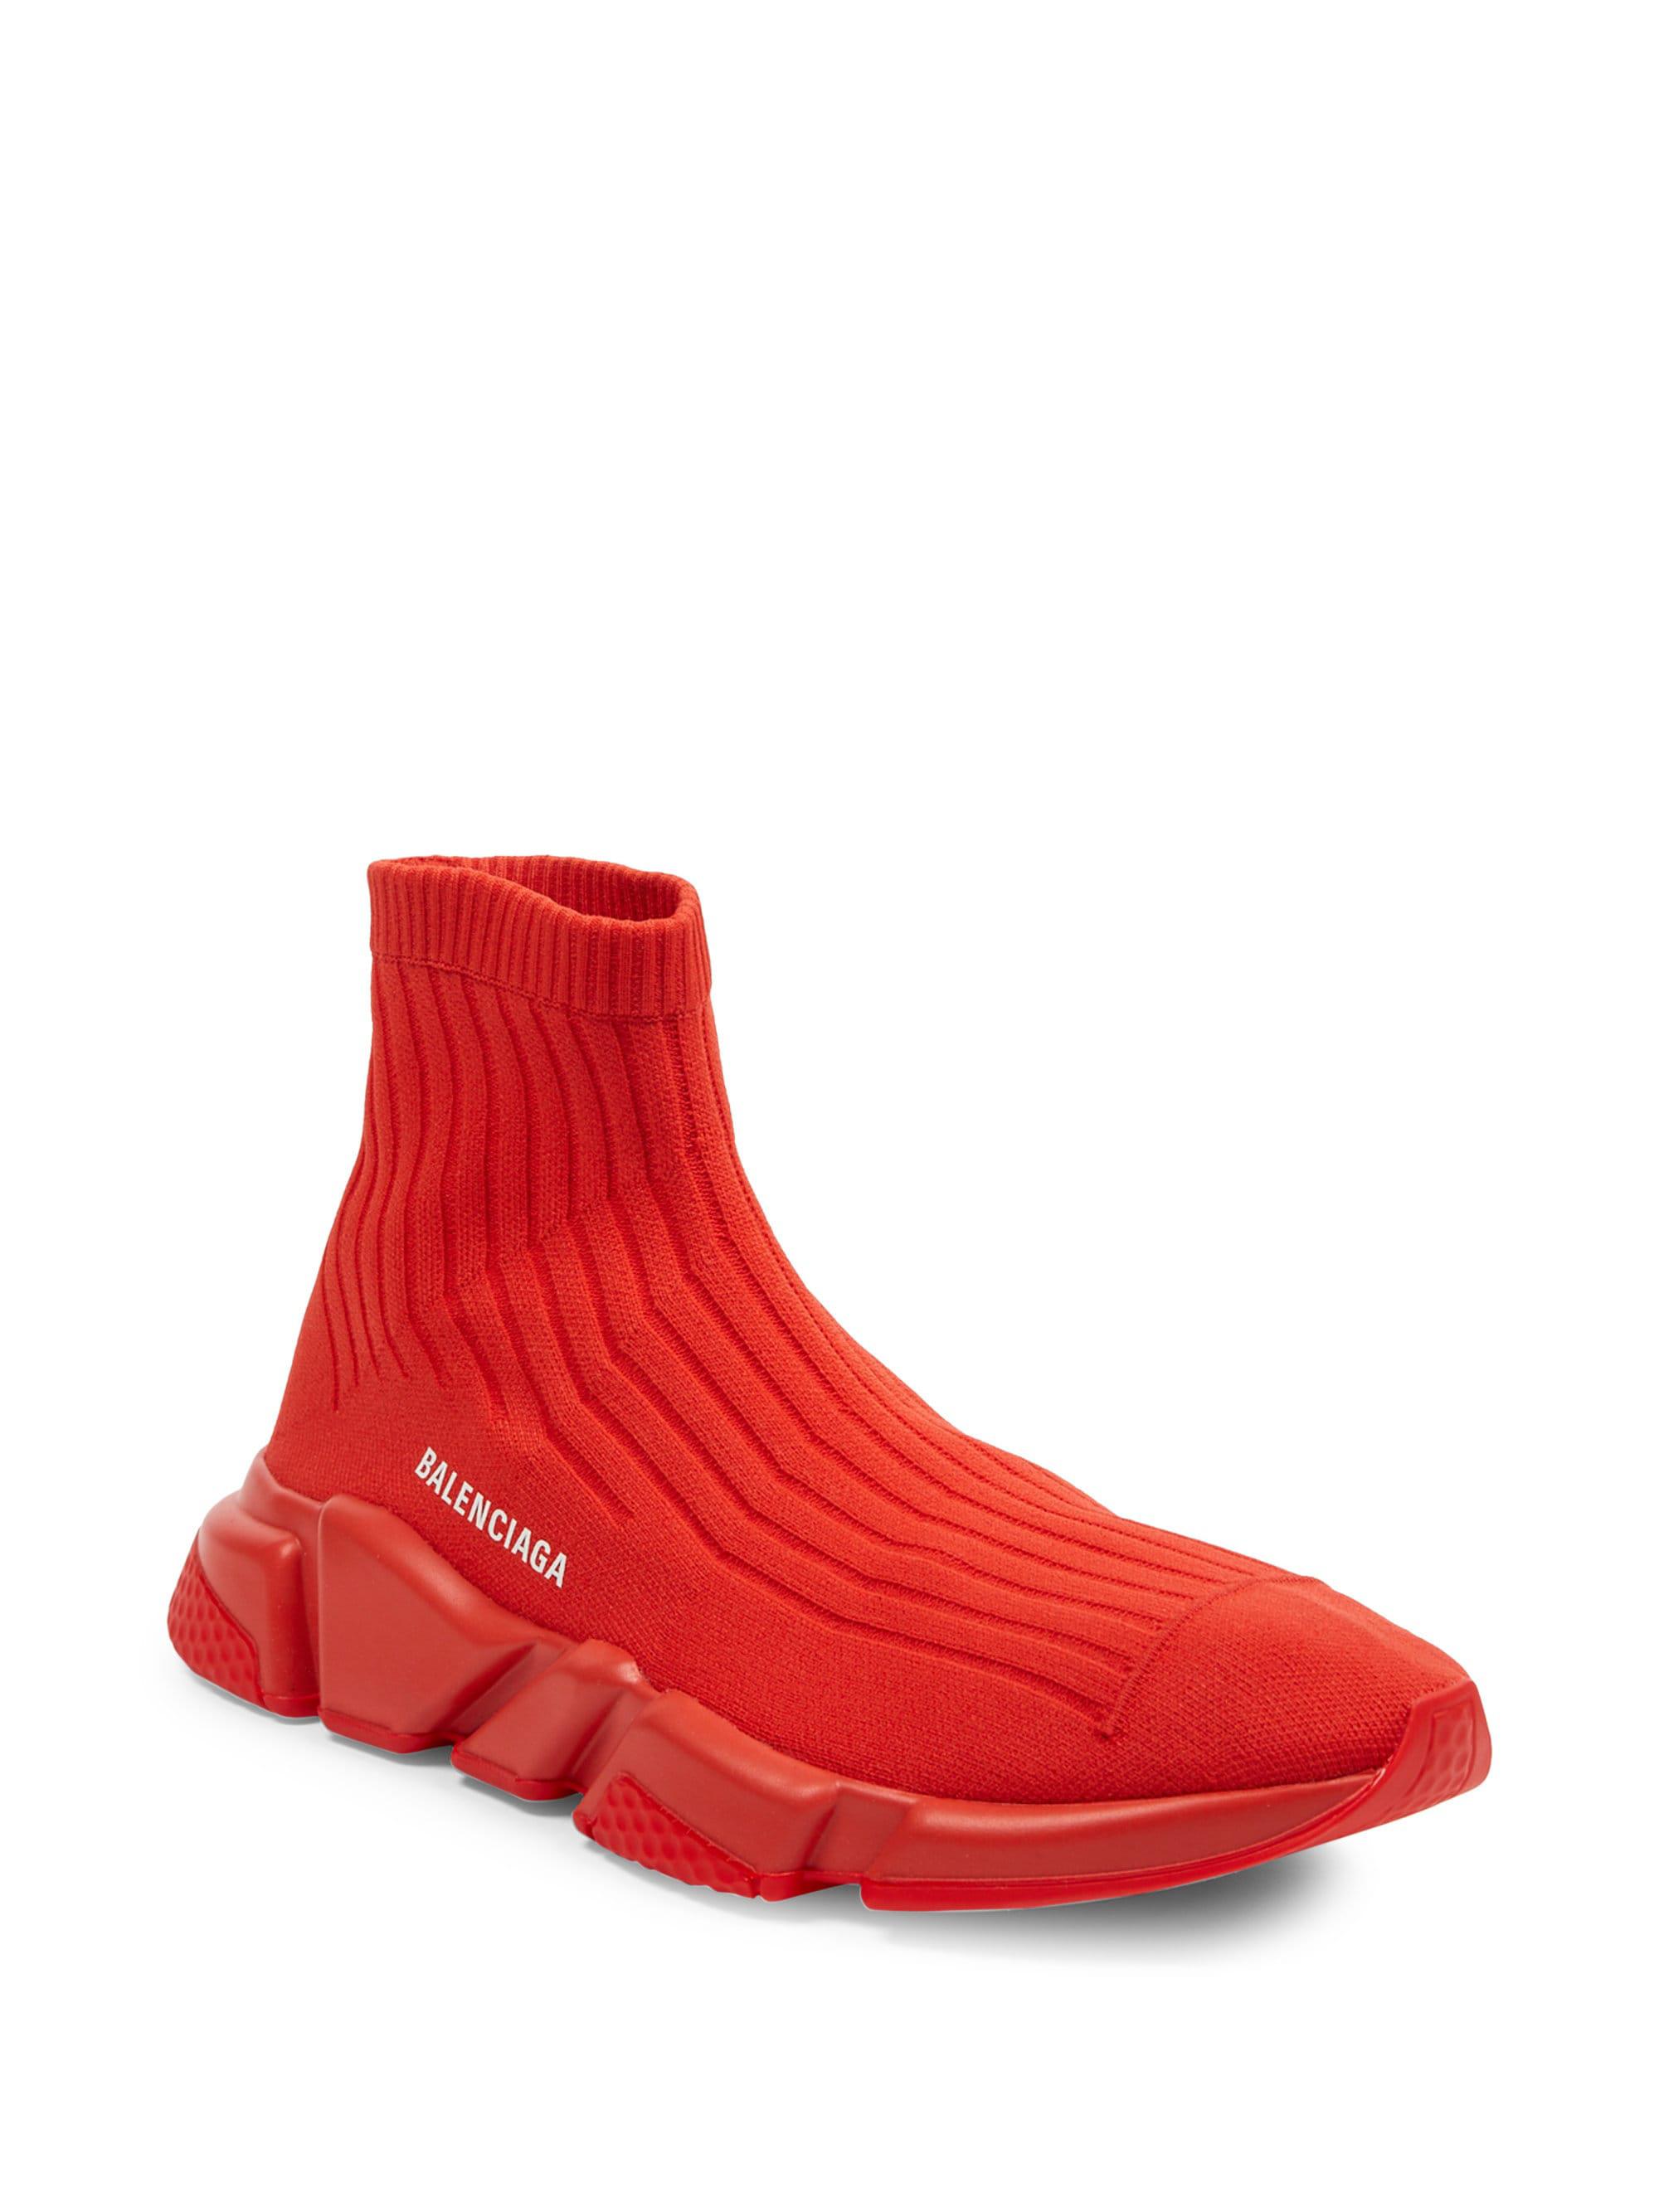 Balenciaga Synthetic Speed Rib Sock Trainers in Red for Men - Lyst